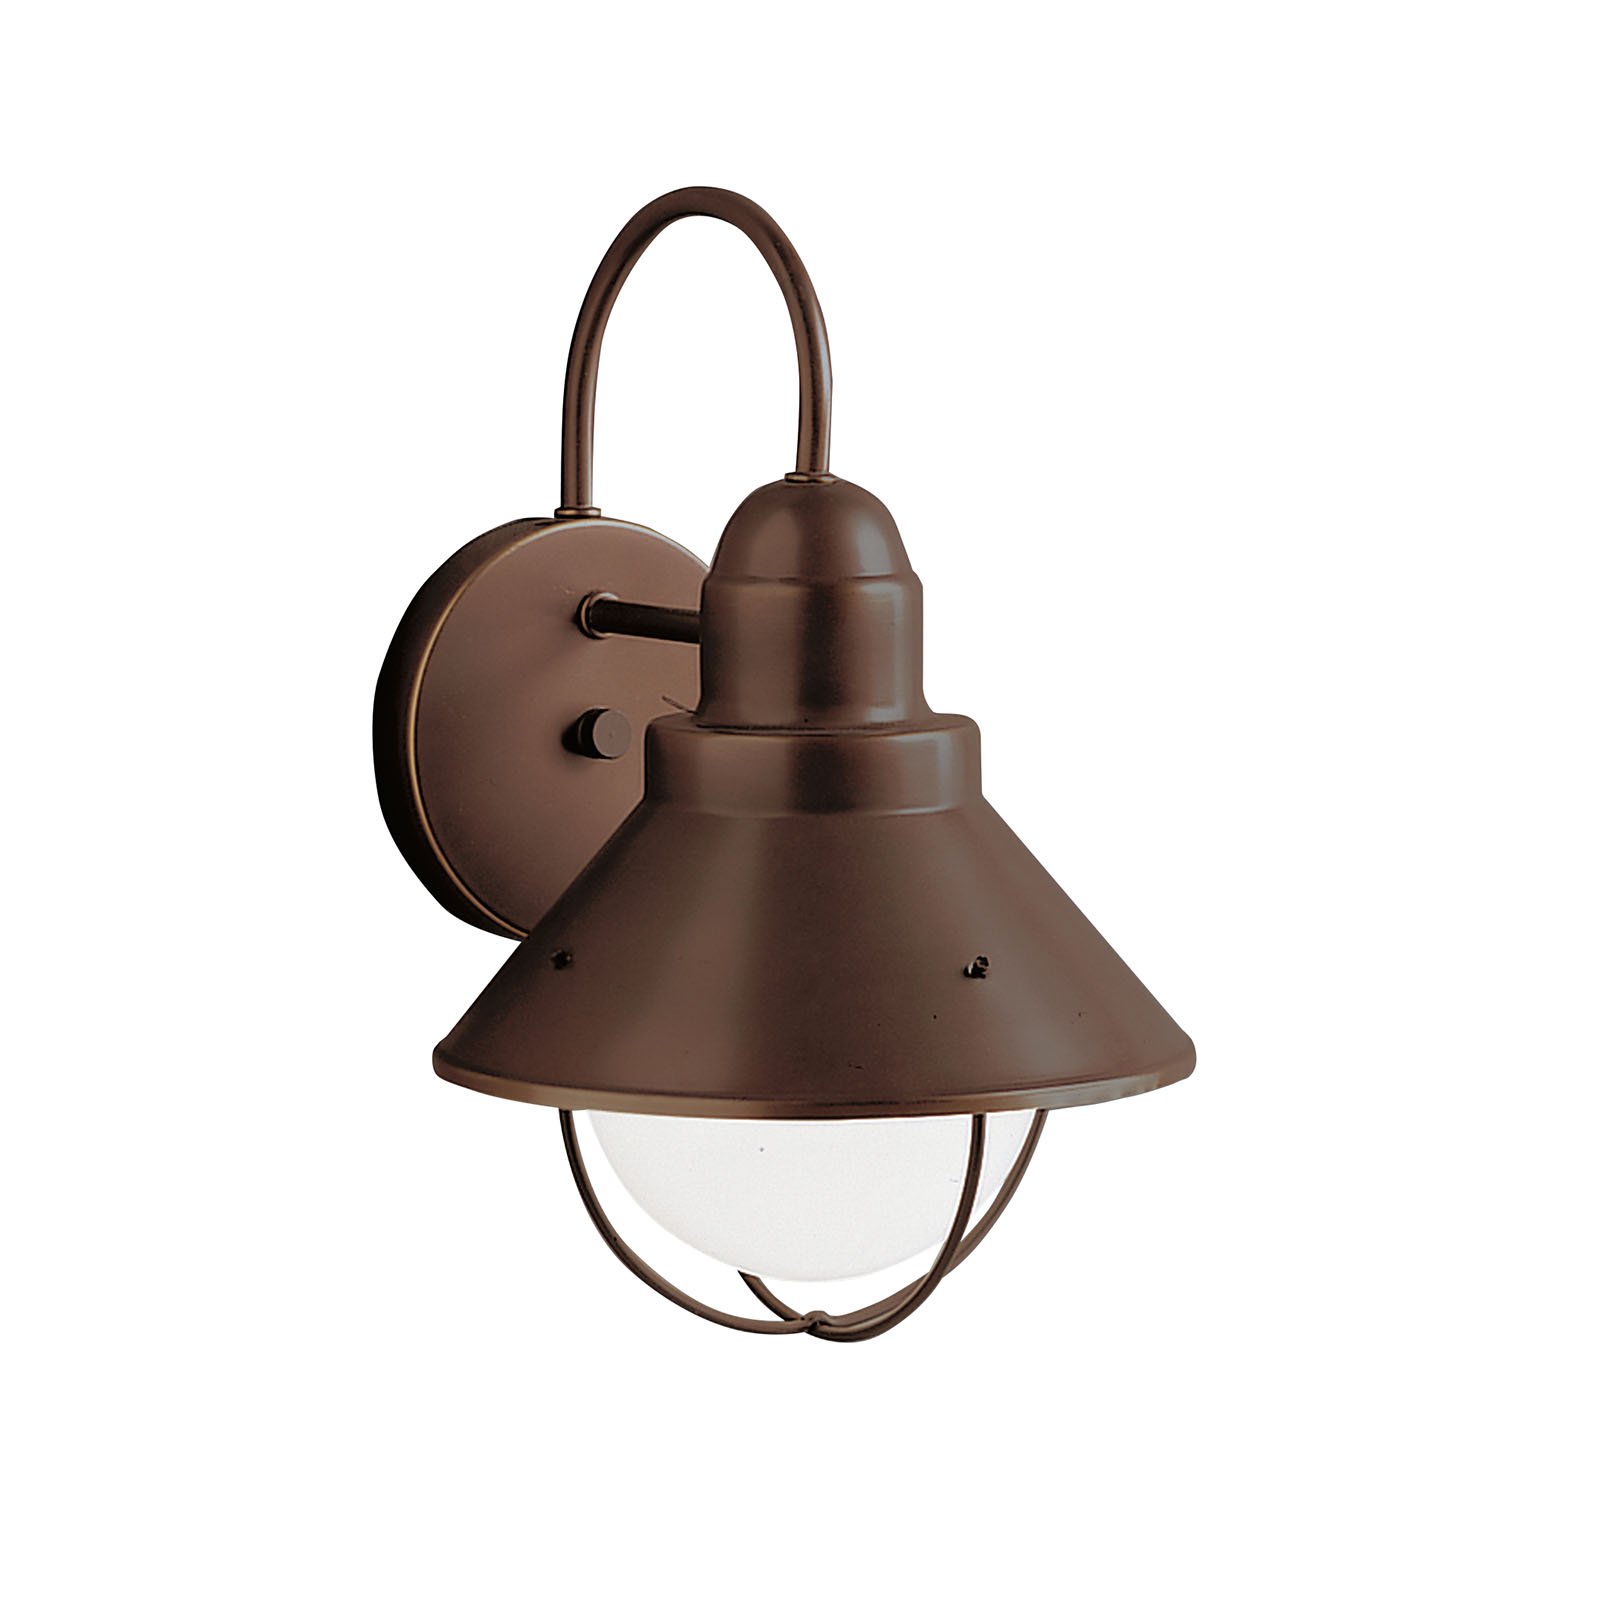 The Seaside(TM) 12in. 1 light outdoor wall light features a classic look with its Olde Bronze(R) and glass globe. The Seaside(TM)Wall Light works in several aesthetic environments, including rustic, coastal, traditional and transitional.